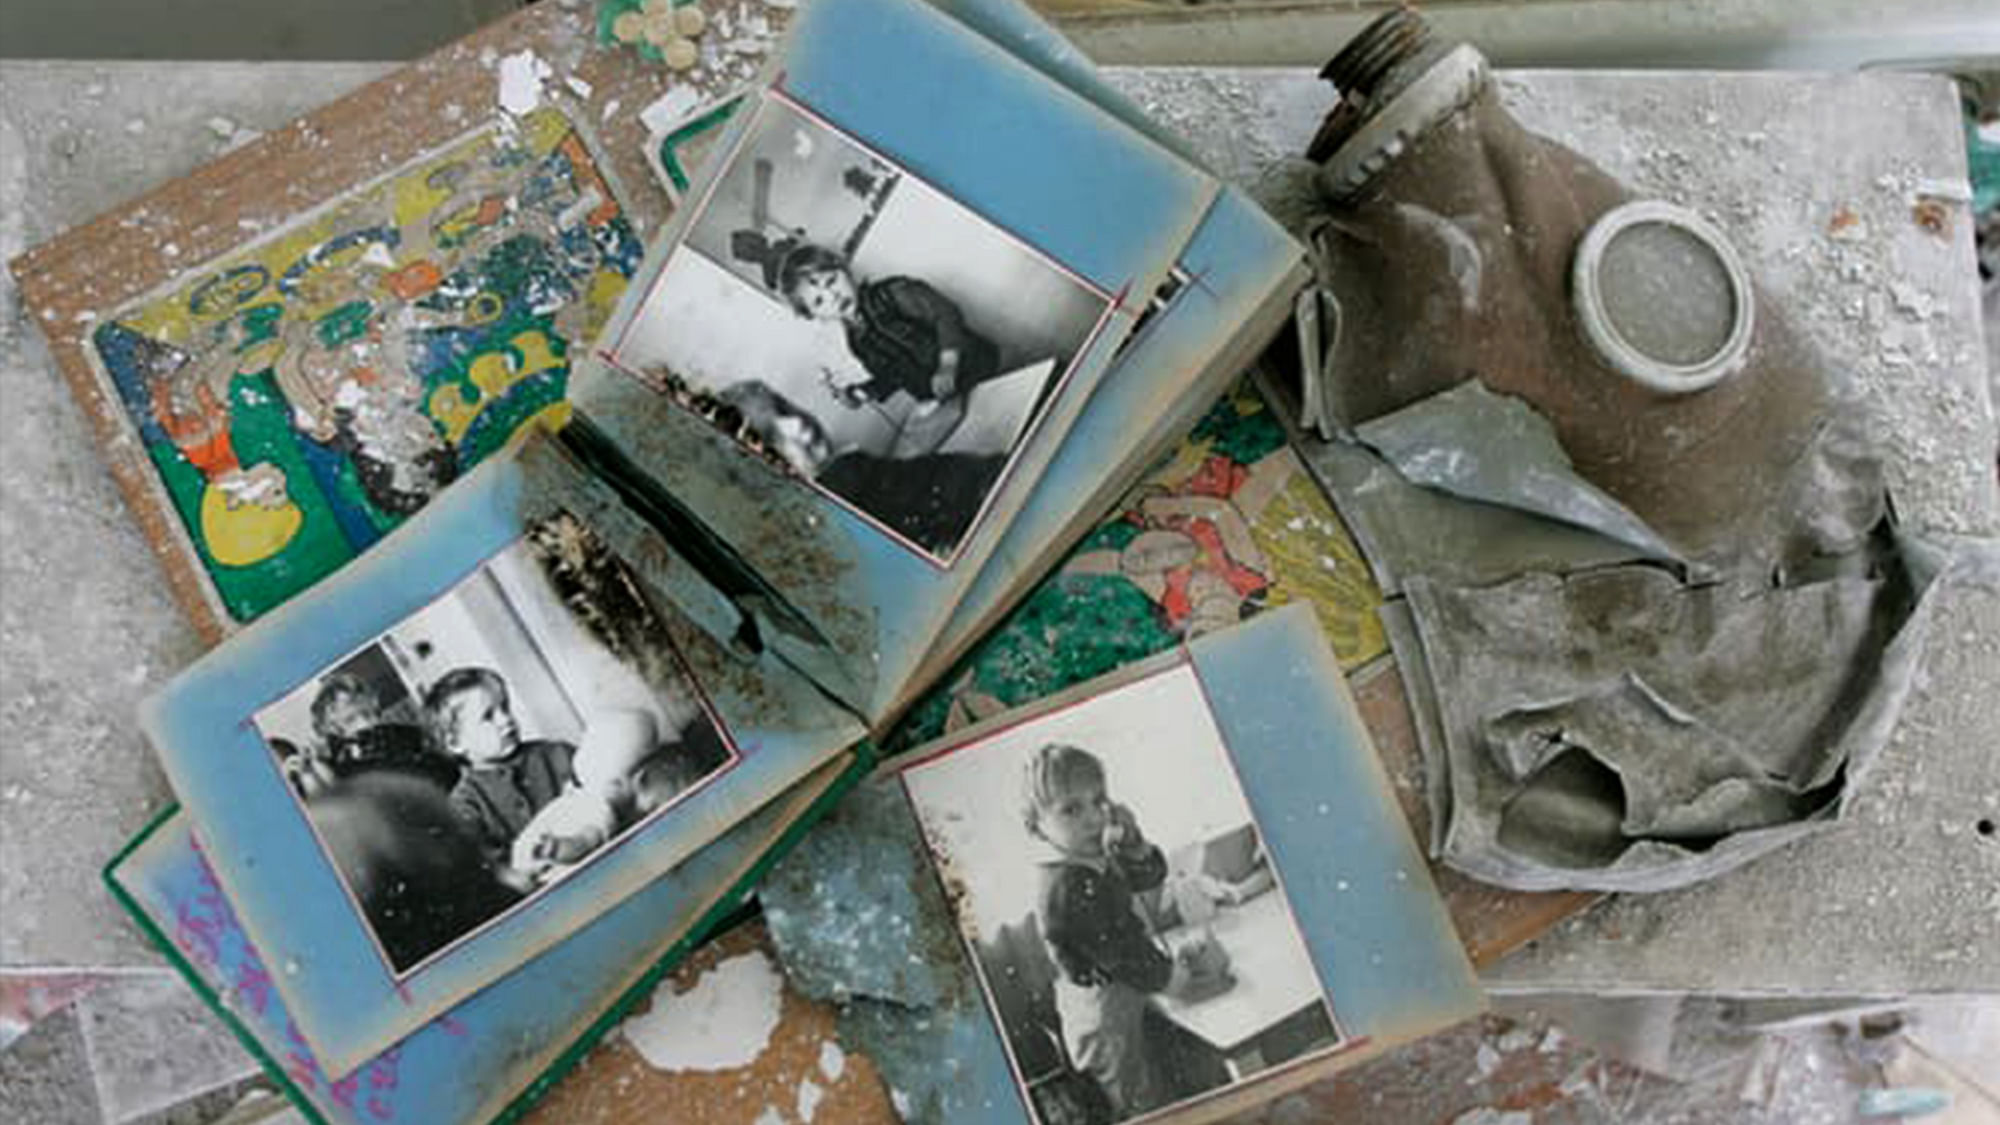 Abandoned photo albums next to a gas mask in the nuclear township of Chernobyl, 3 kms from the nuclear plant. (Photo: Reuters) &nbsp; &nbsp; &nbsp; &nbsp; &nbsp; &nbsp; &nbsp; &nbsp; &nbsp; &nbsp; &nbsp; &nbsp; &nbsp; &nbsp; &nbsp; &nbsp; &nbsp; &nbsp; &nbsp; &nbsp; &nbsp; &nbsp; &nbsp; &nbsp; &nbsp; &nbsp; &nbsp; &nbsp; &nbsp; &nbsp; &nbsp; &nbsp; &nbsp; &nbsp; &nbsp; &nbsp; &nbsp; &nbsp;&nbsp;